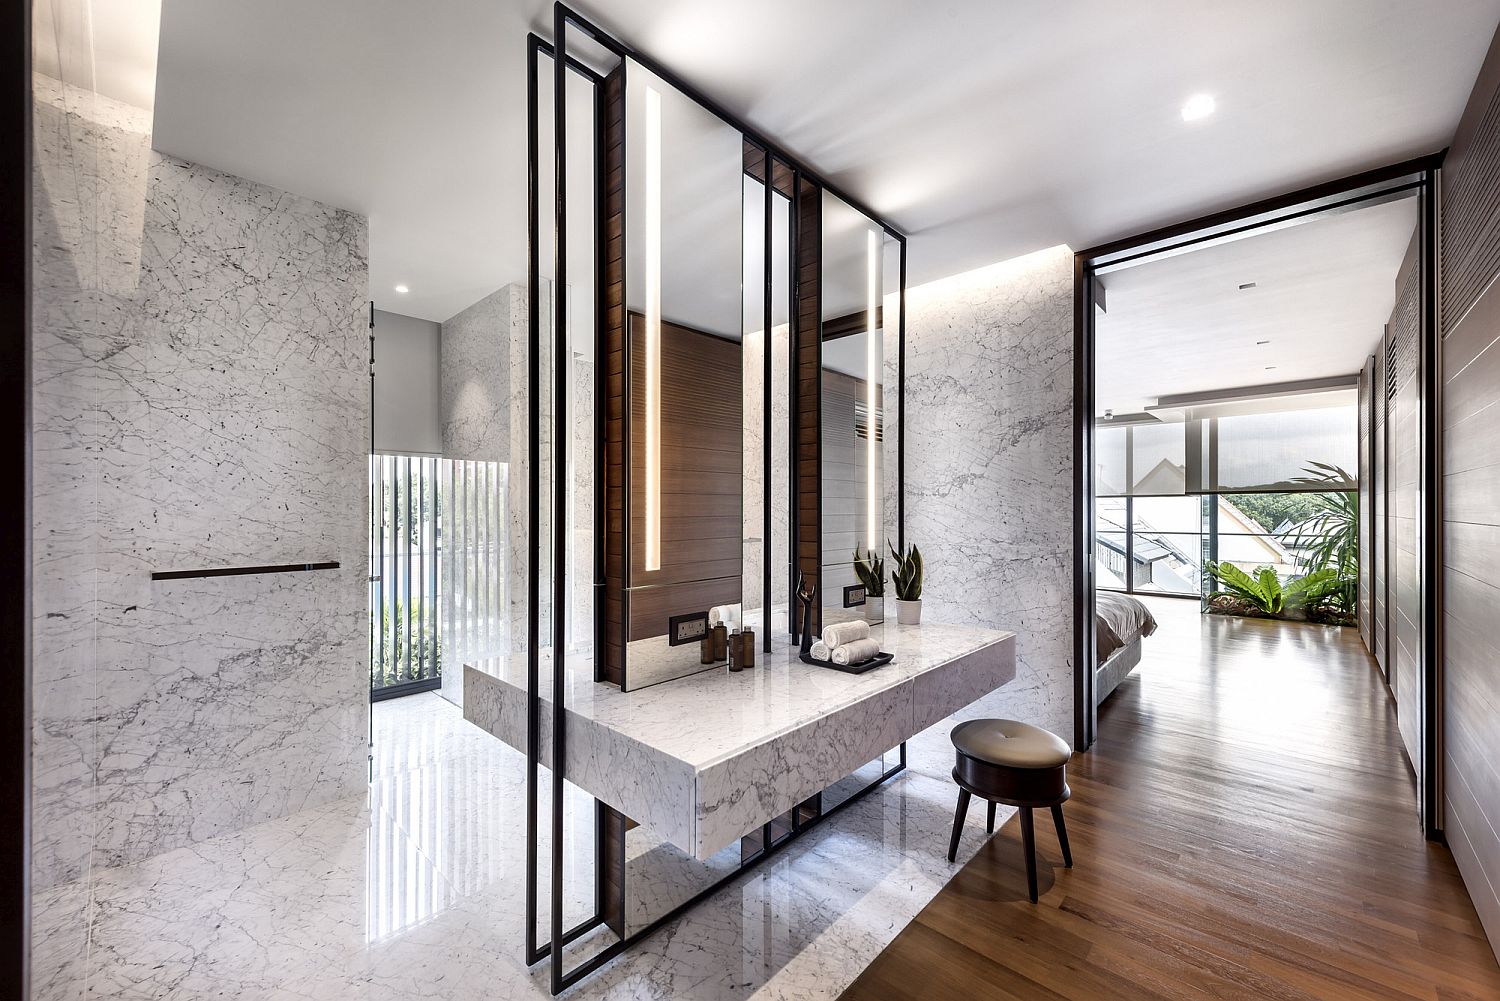 Spacious-and-stylish-contemporary-bath-with-a-fabulous-vanity